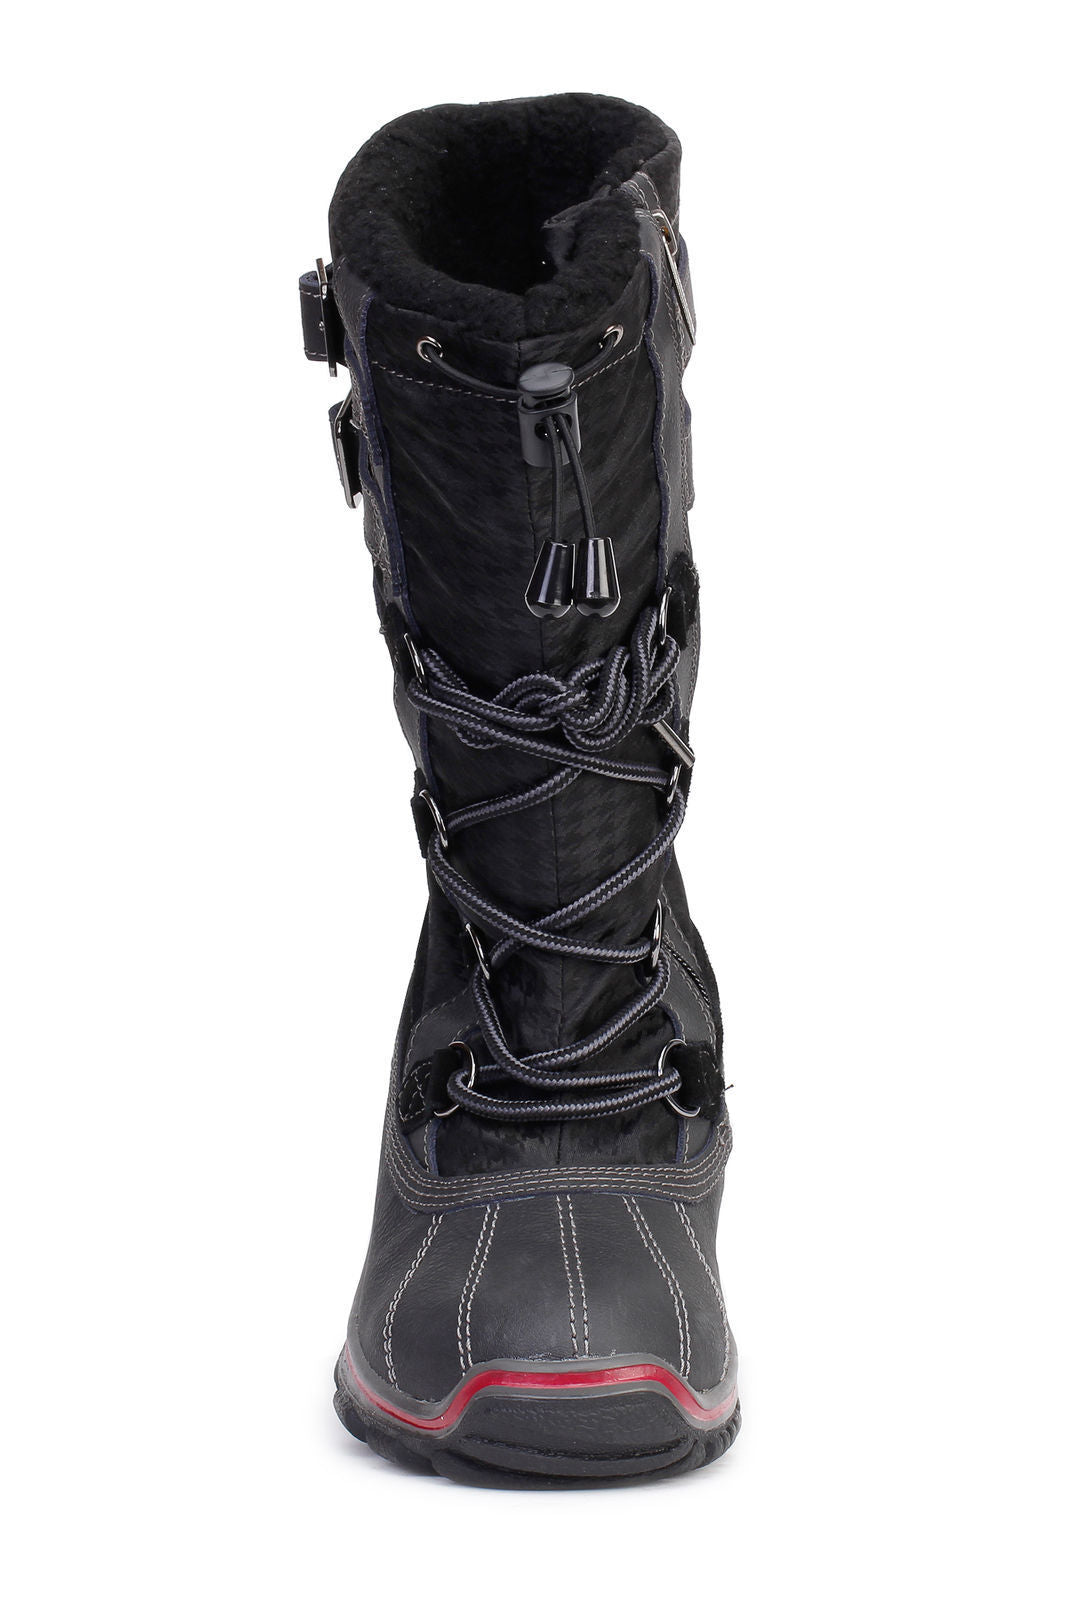 A side view of a black women's Pajar Adriana winter boot with a fur lining, laced-up front, adjustable buckles, and a sturdy sole designed for cold weather.